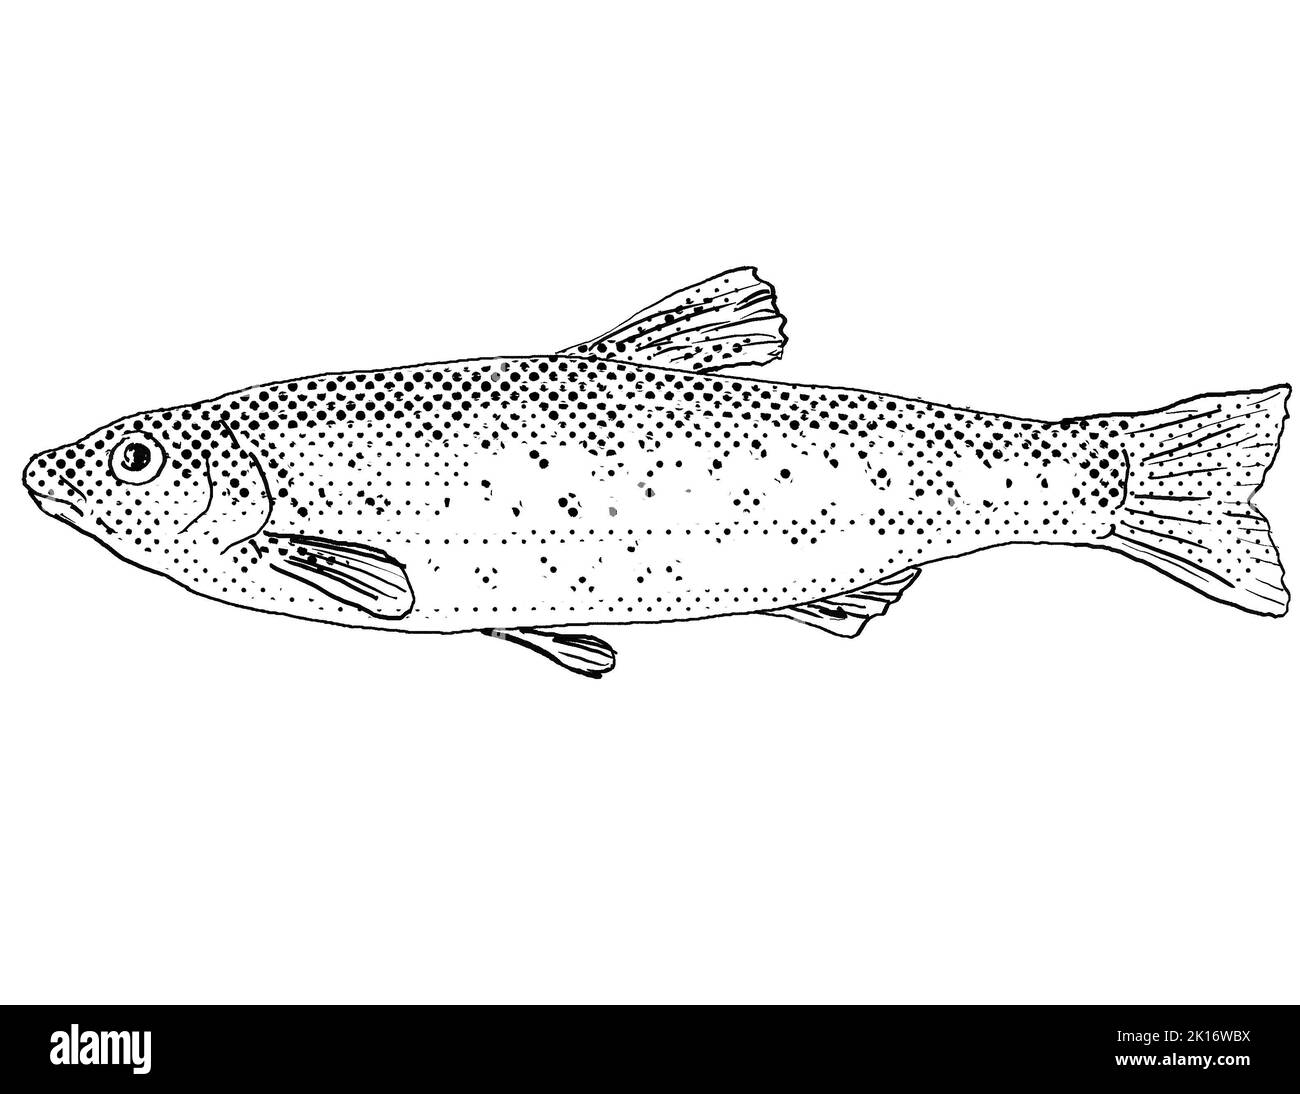 Cartoon style line drawing of a central stoneroller or Campostoma anomalum freshwater fish endemic to North America with halftone dots shading on isol Stock Photo